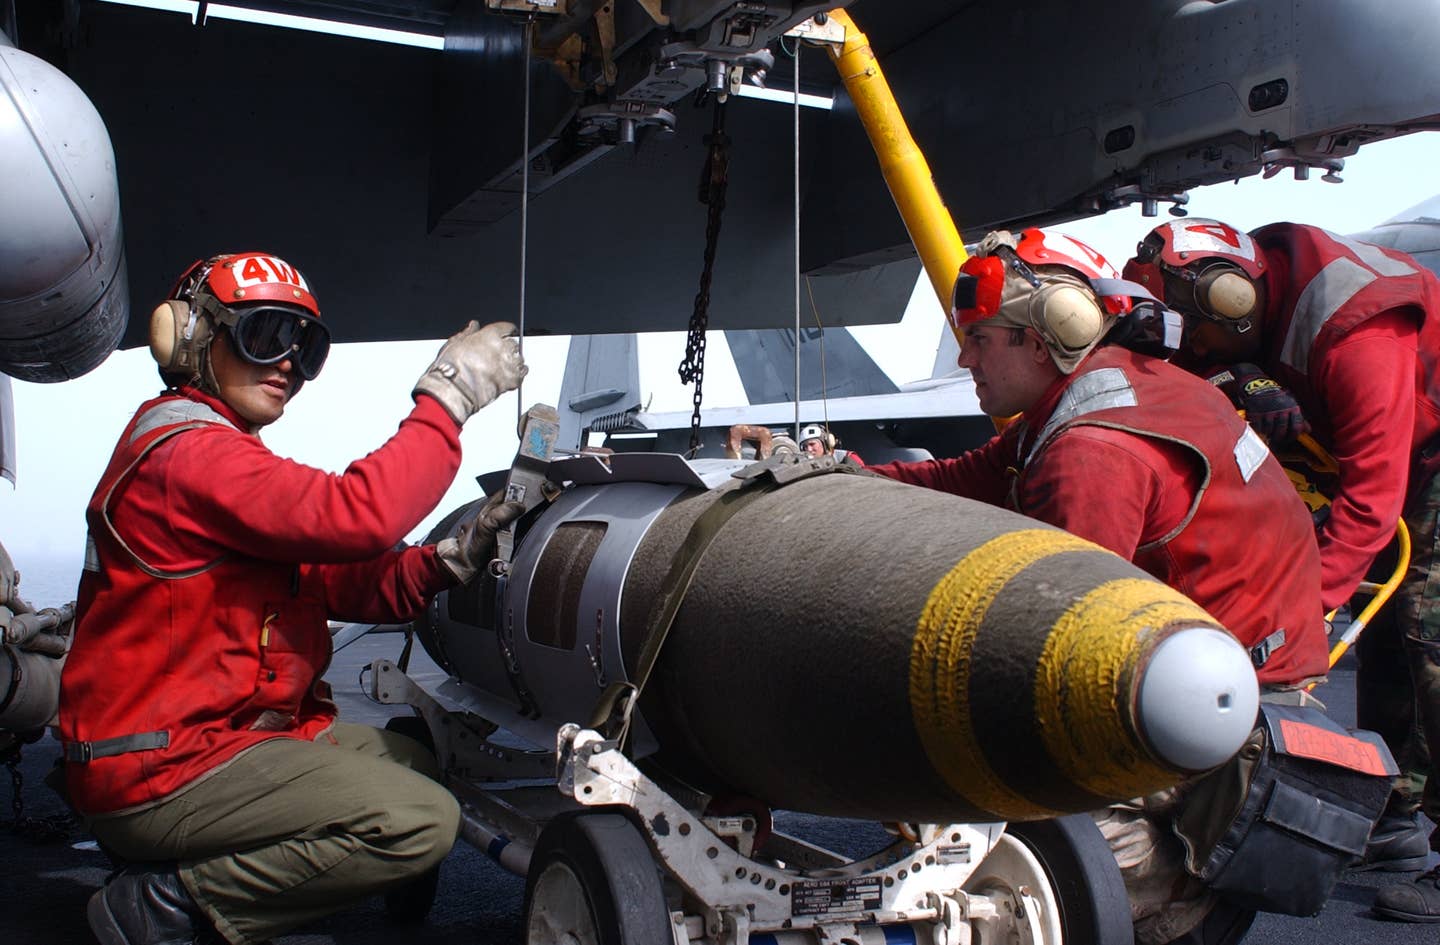 Aviation ordnancemen load a 2,000-pound Joint Direct Attack Munition (JDAM) onto an F/A-18 Hornet fighter jet aboard the aircraft carrier USS <em>John C. Stennis</em>, while conducting combat missions in support of Operation Enduring Freedom. <em>U.S. Navy photo by Photographer’s Mate 3rd Class Alta I. Cutler</em>